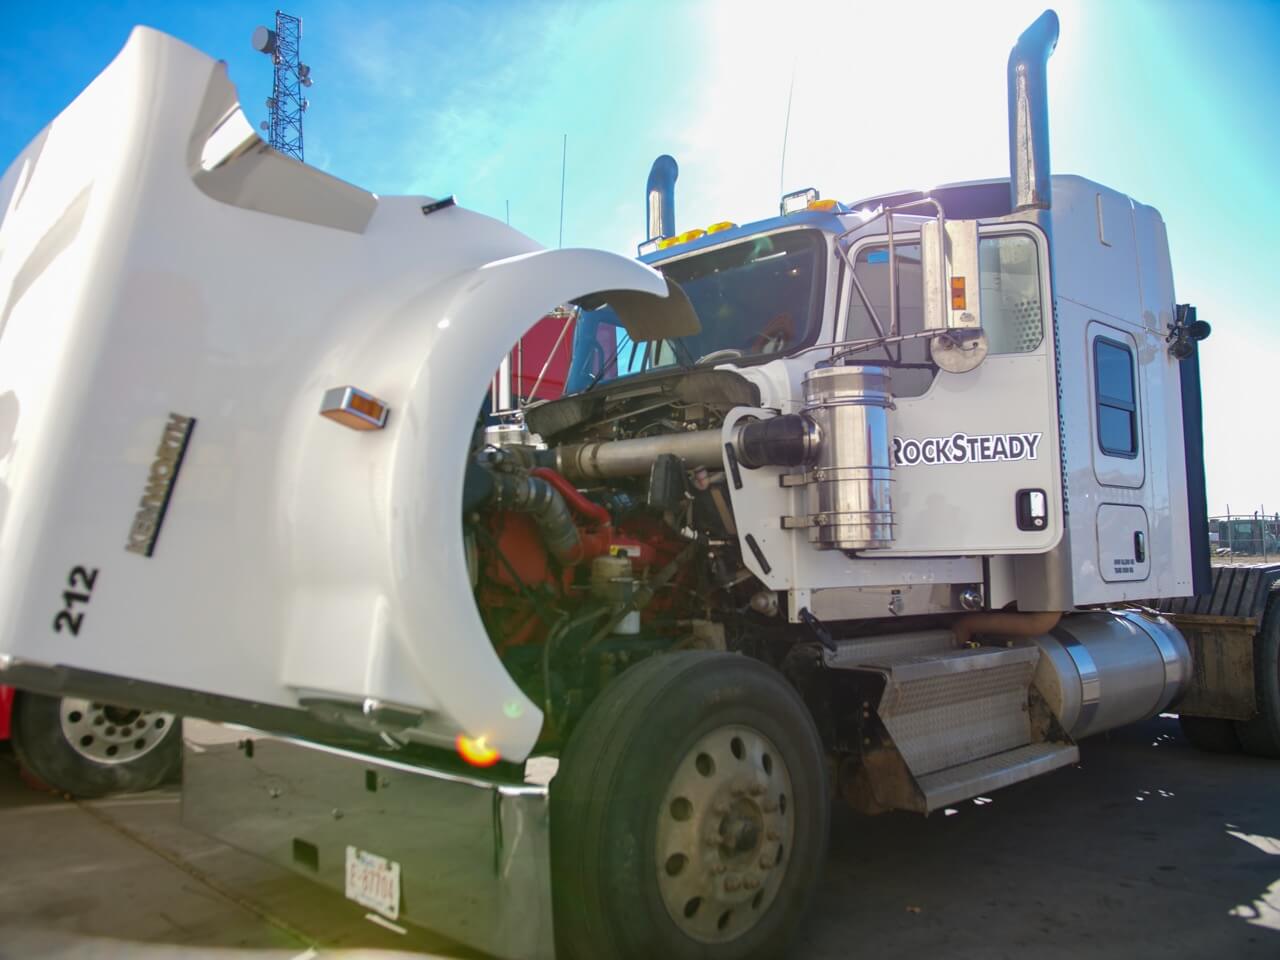 Kenworth Truck Repair: Necessary Services Required to Keep Your Kenworth Truck on the Road